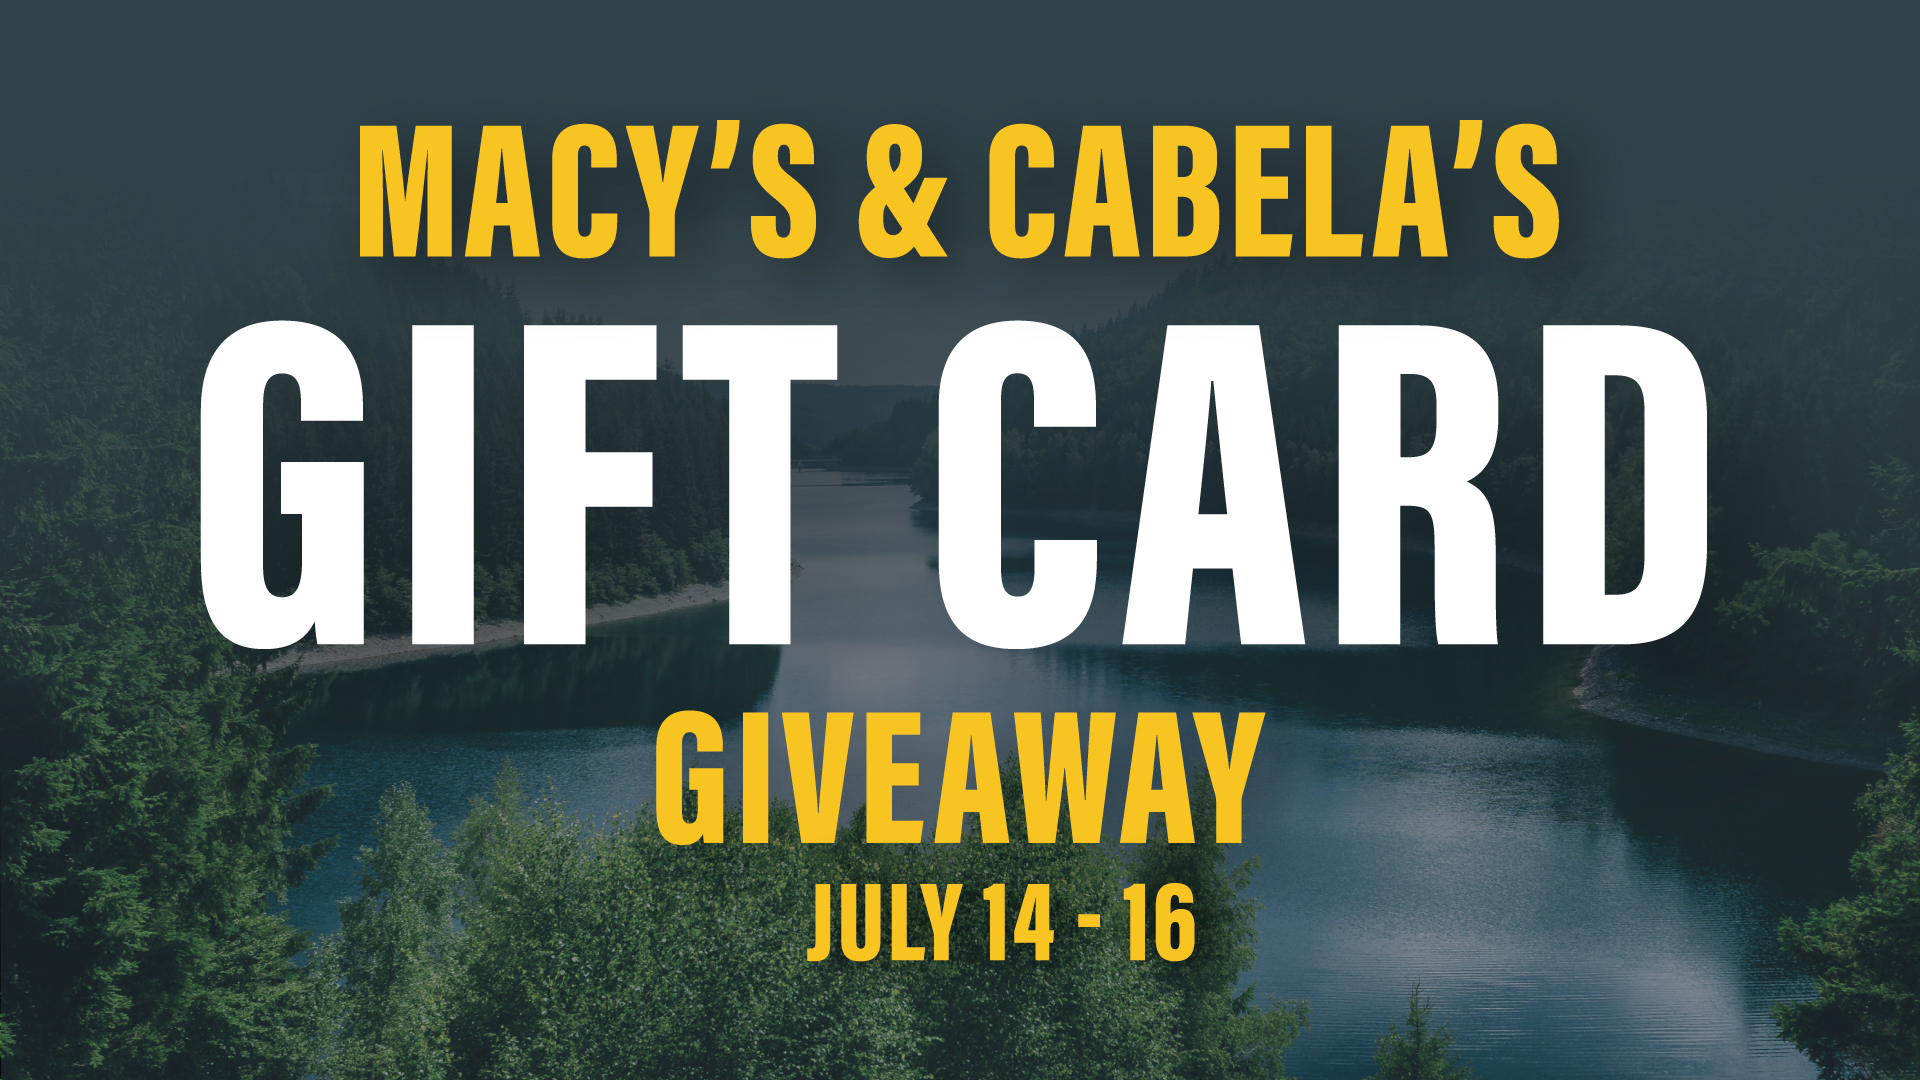 Macy's & Cabela's Gift Card Giveaway